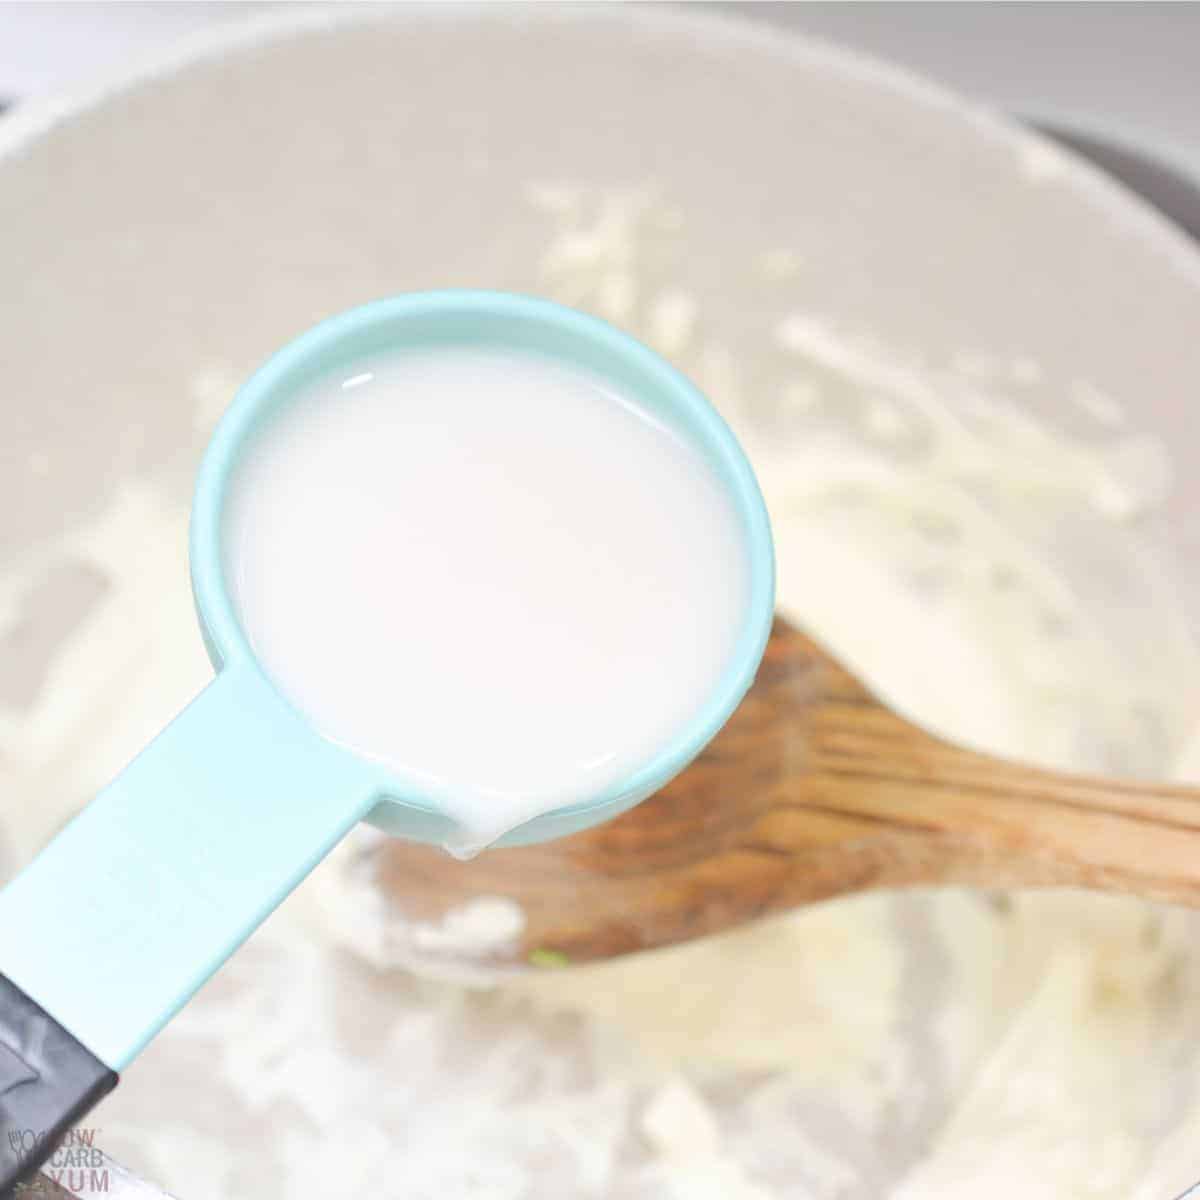 adding almond milk to the melted cream cheese.